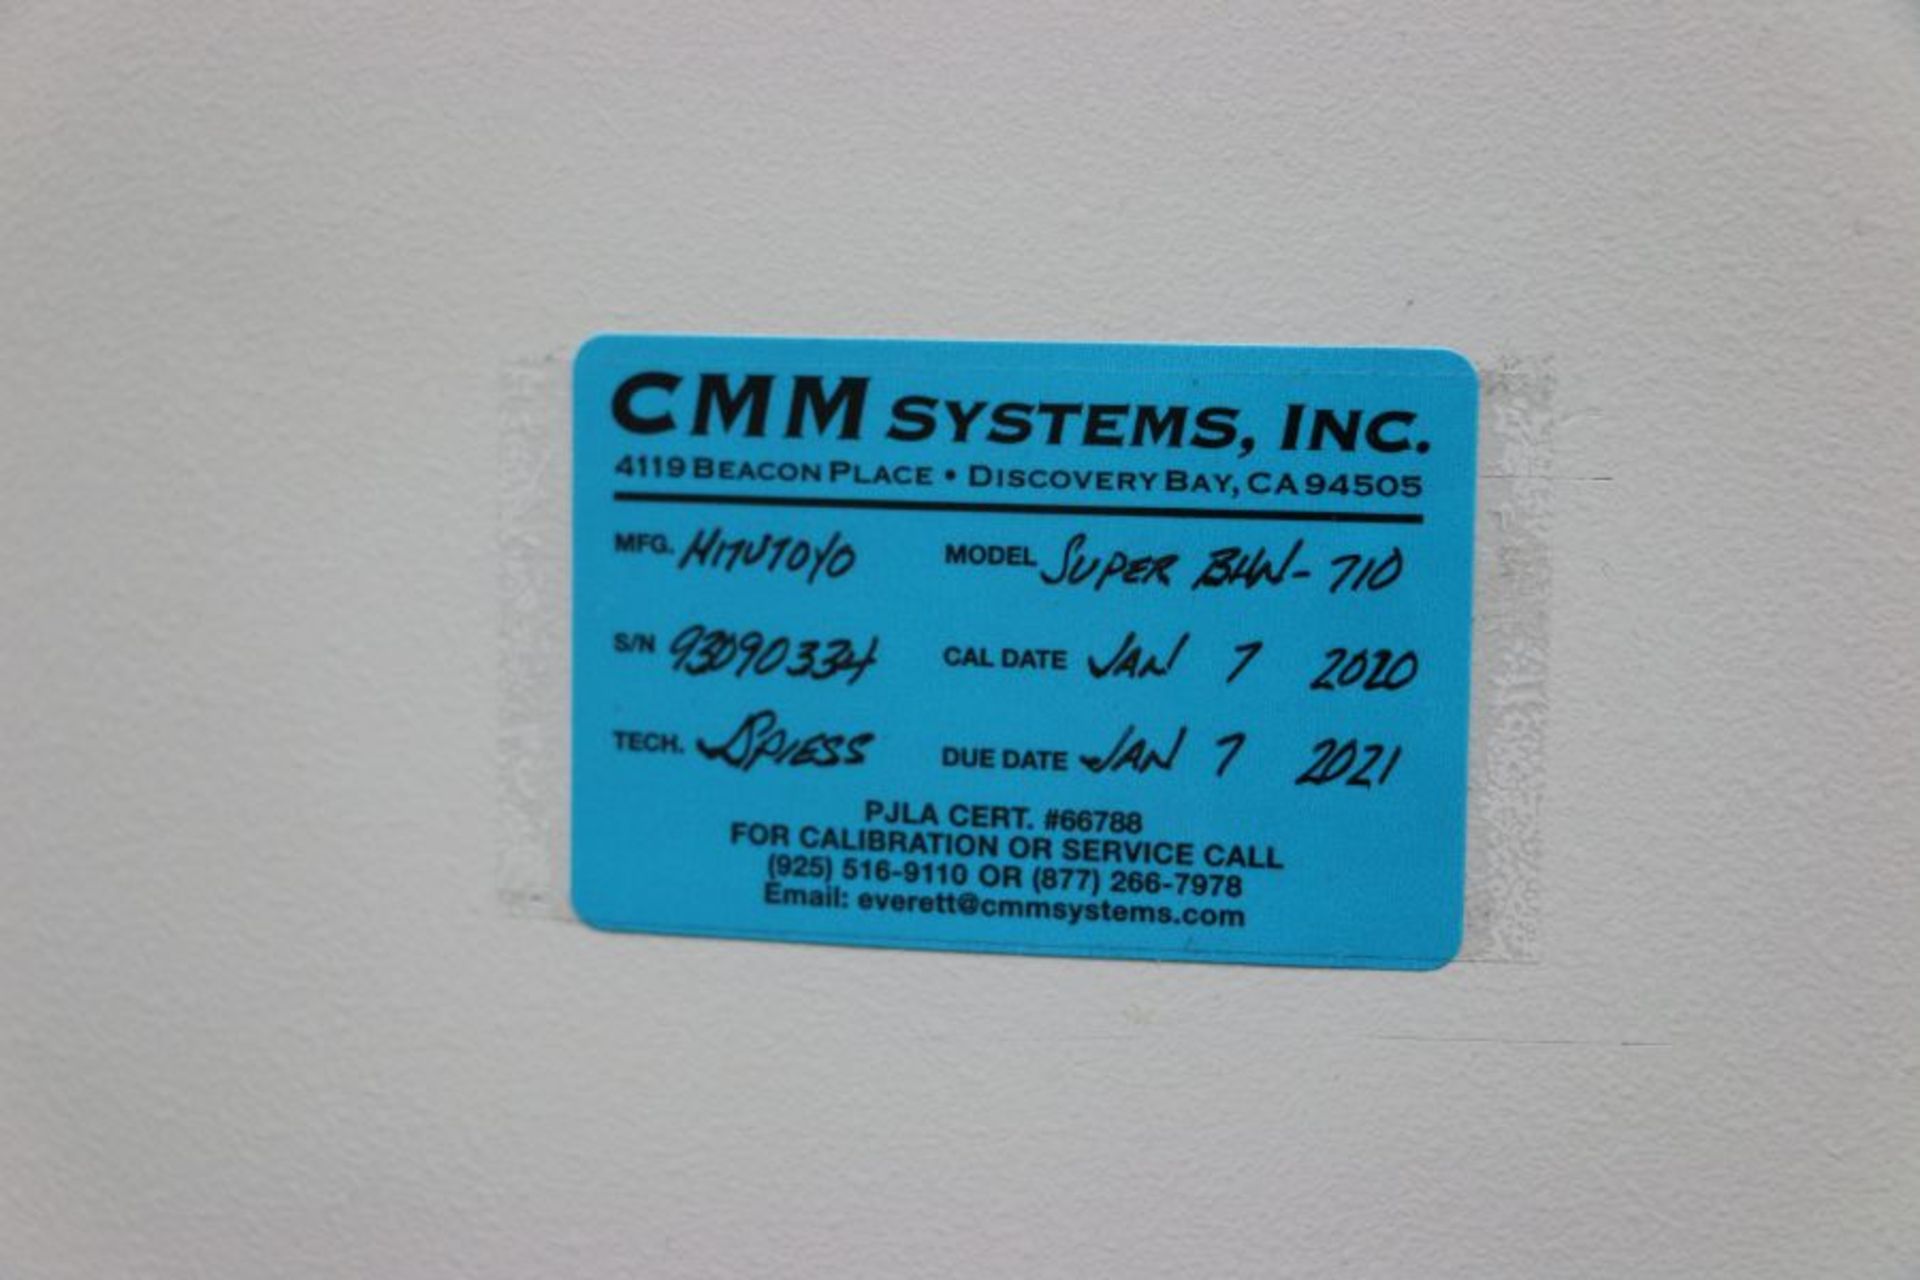 Mitutoyo BHN-710 DCC CMM, 28” x 40” x 24” Travels, PH10 Probe, s/n 93090334, CMM Manager Software, - Image 9 of 19